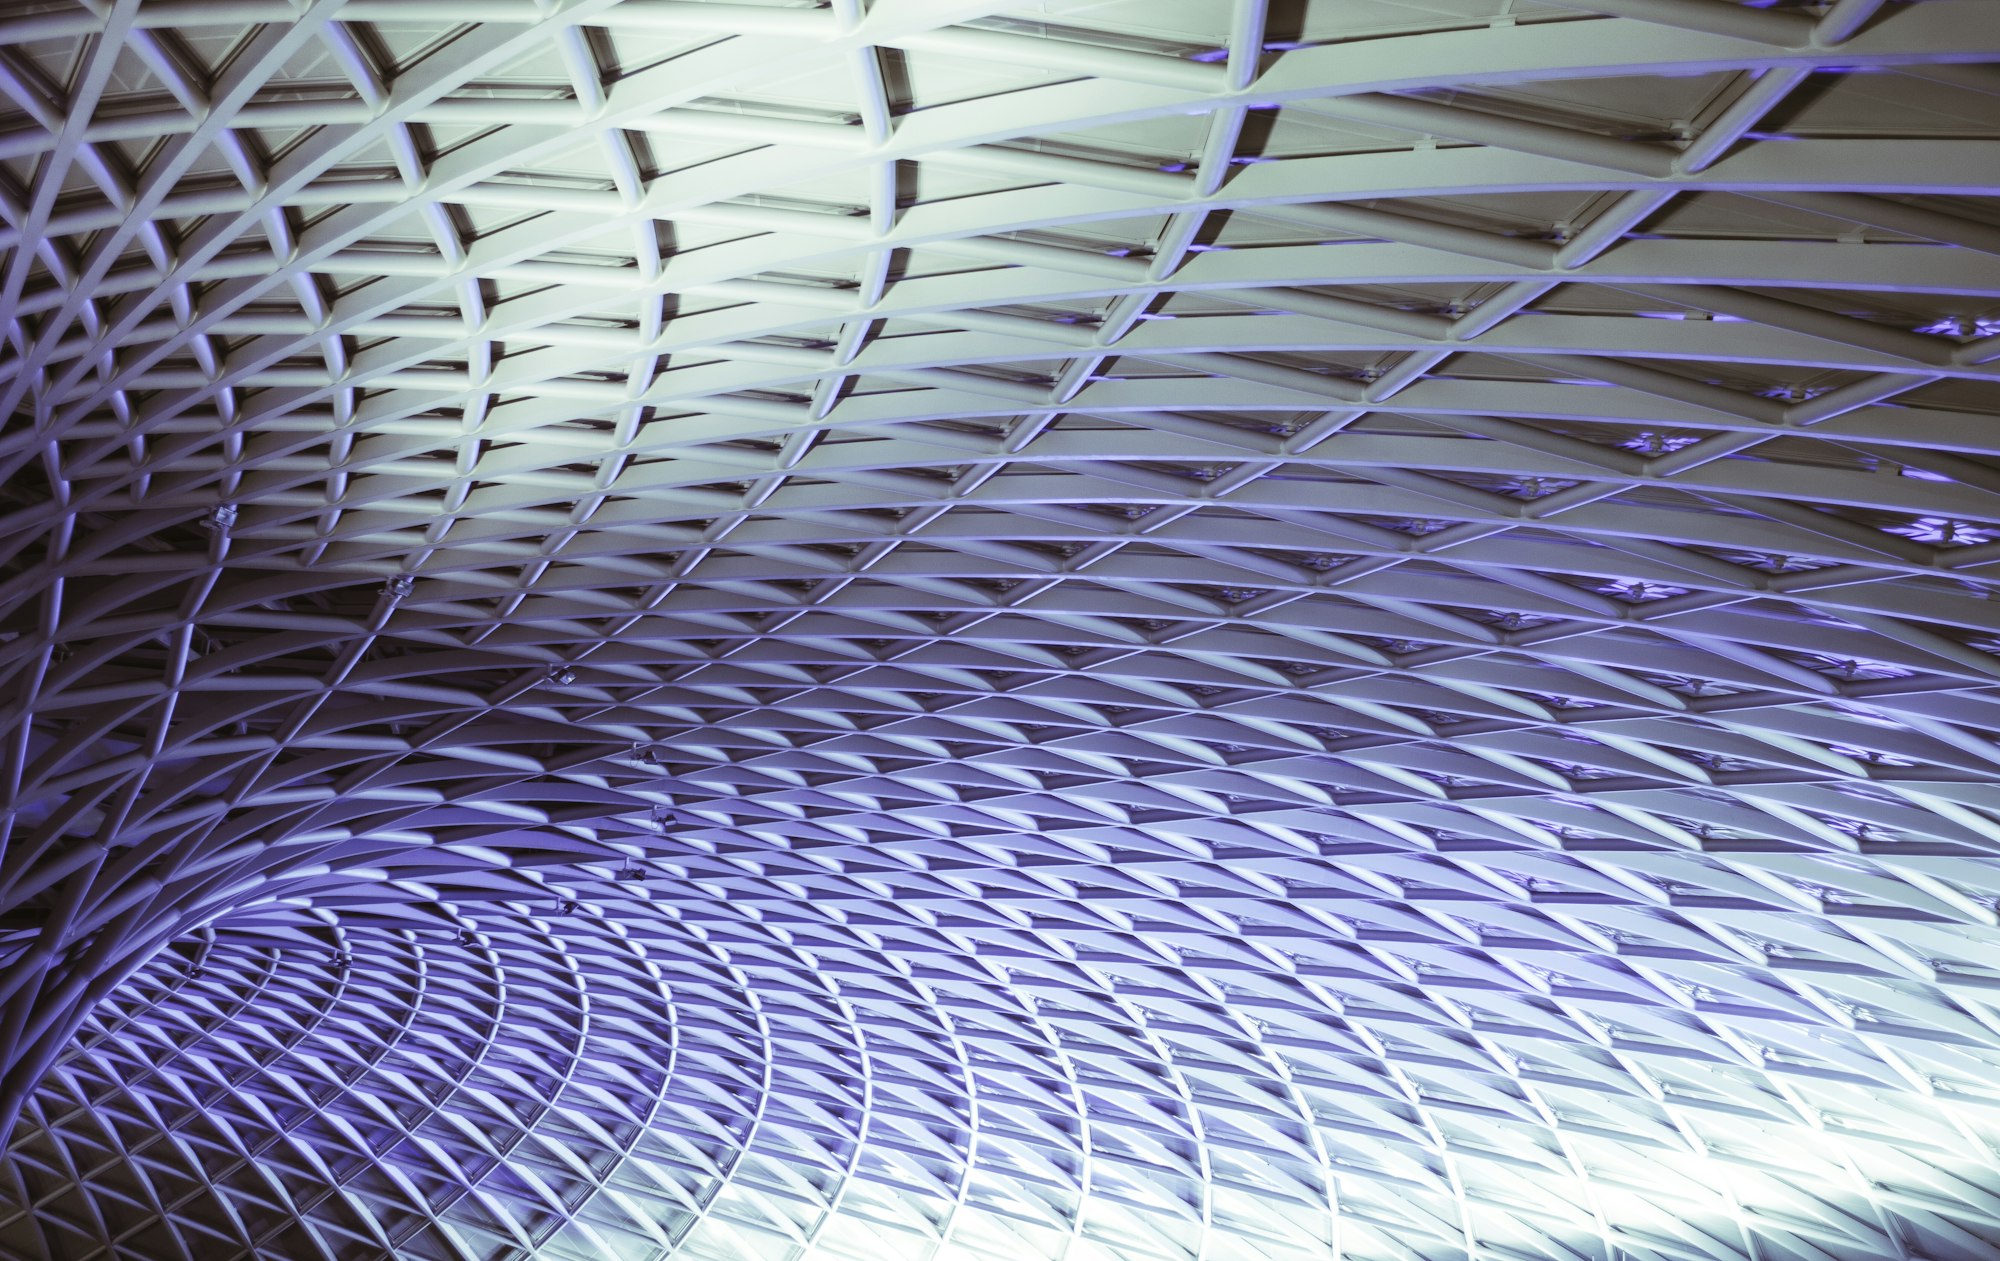 The roof at Kings Cross Station